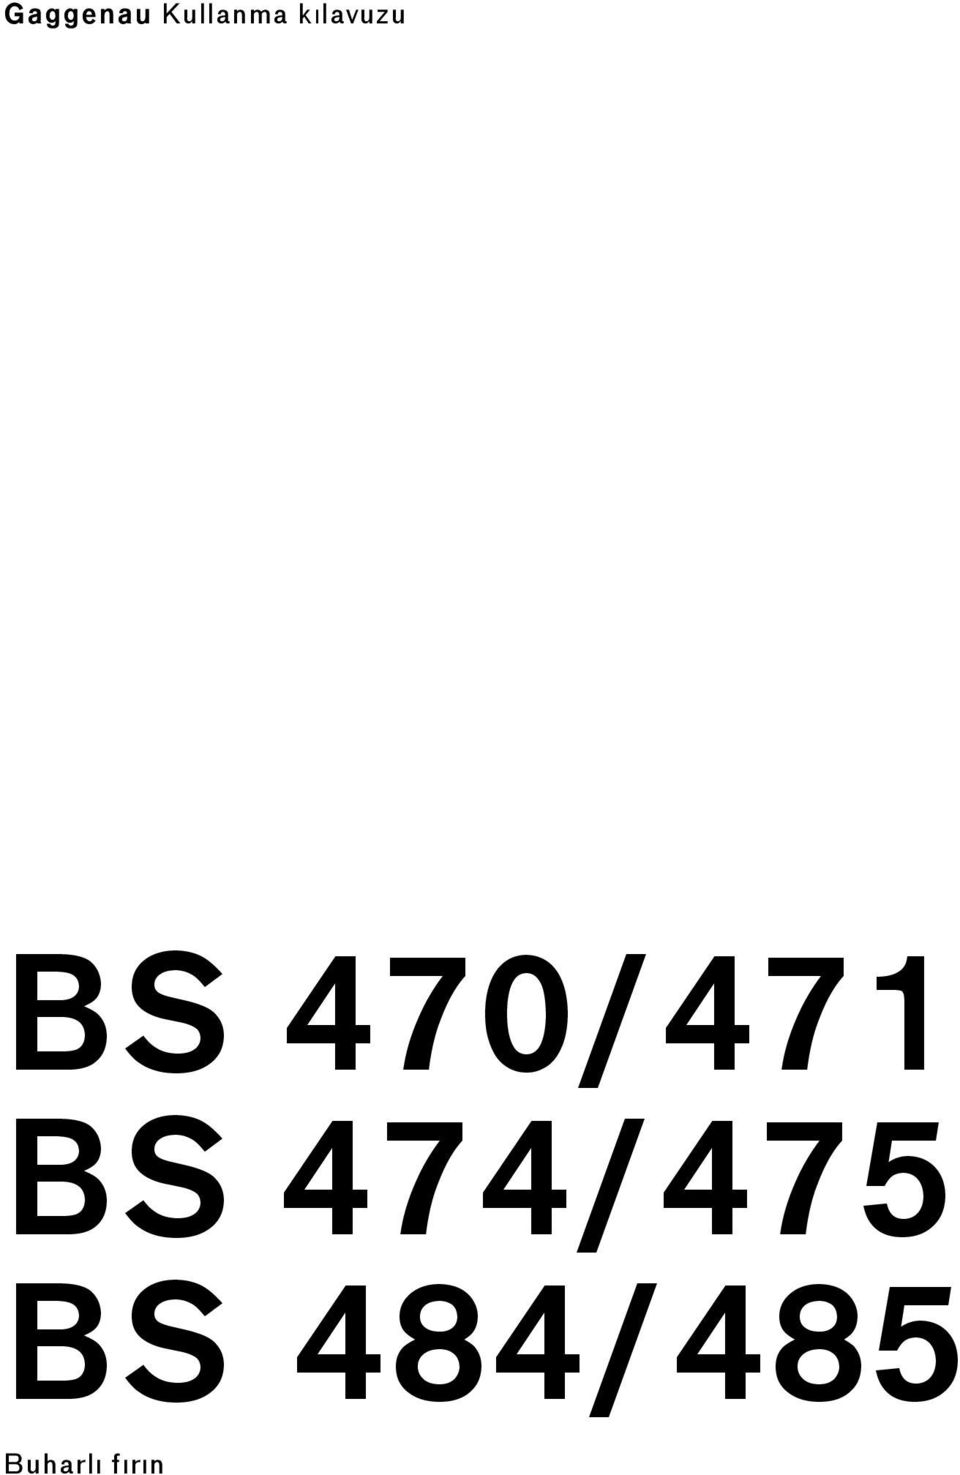 470/471 BS 474/475